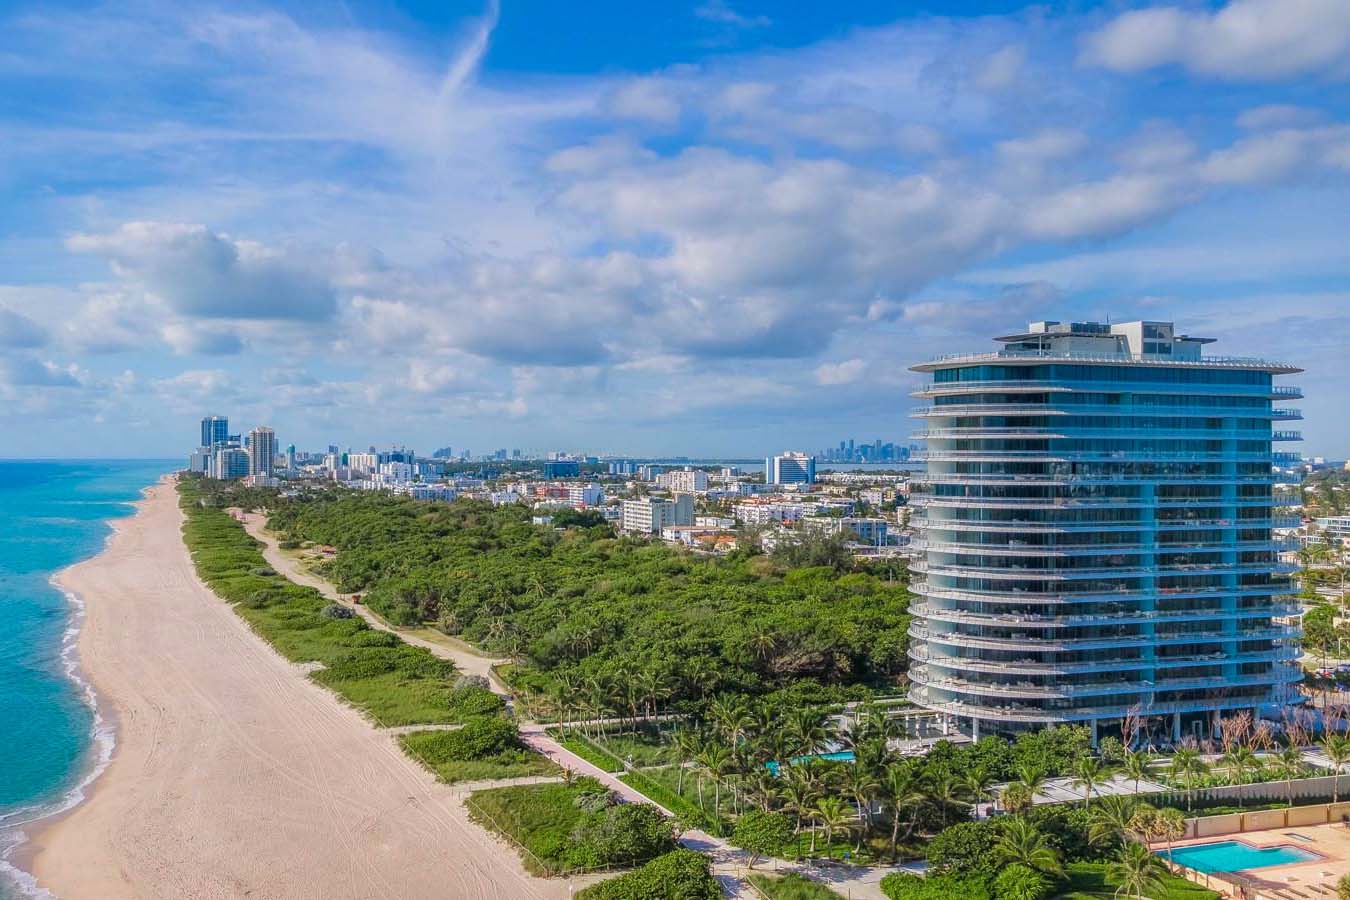 Serenity Welcomes You in Miami at Four Ultra-Luxe Residential Towers